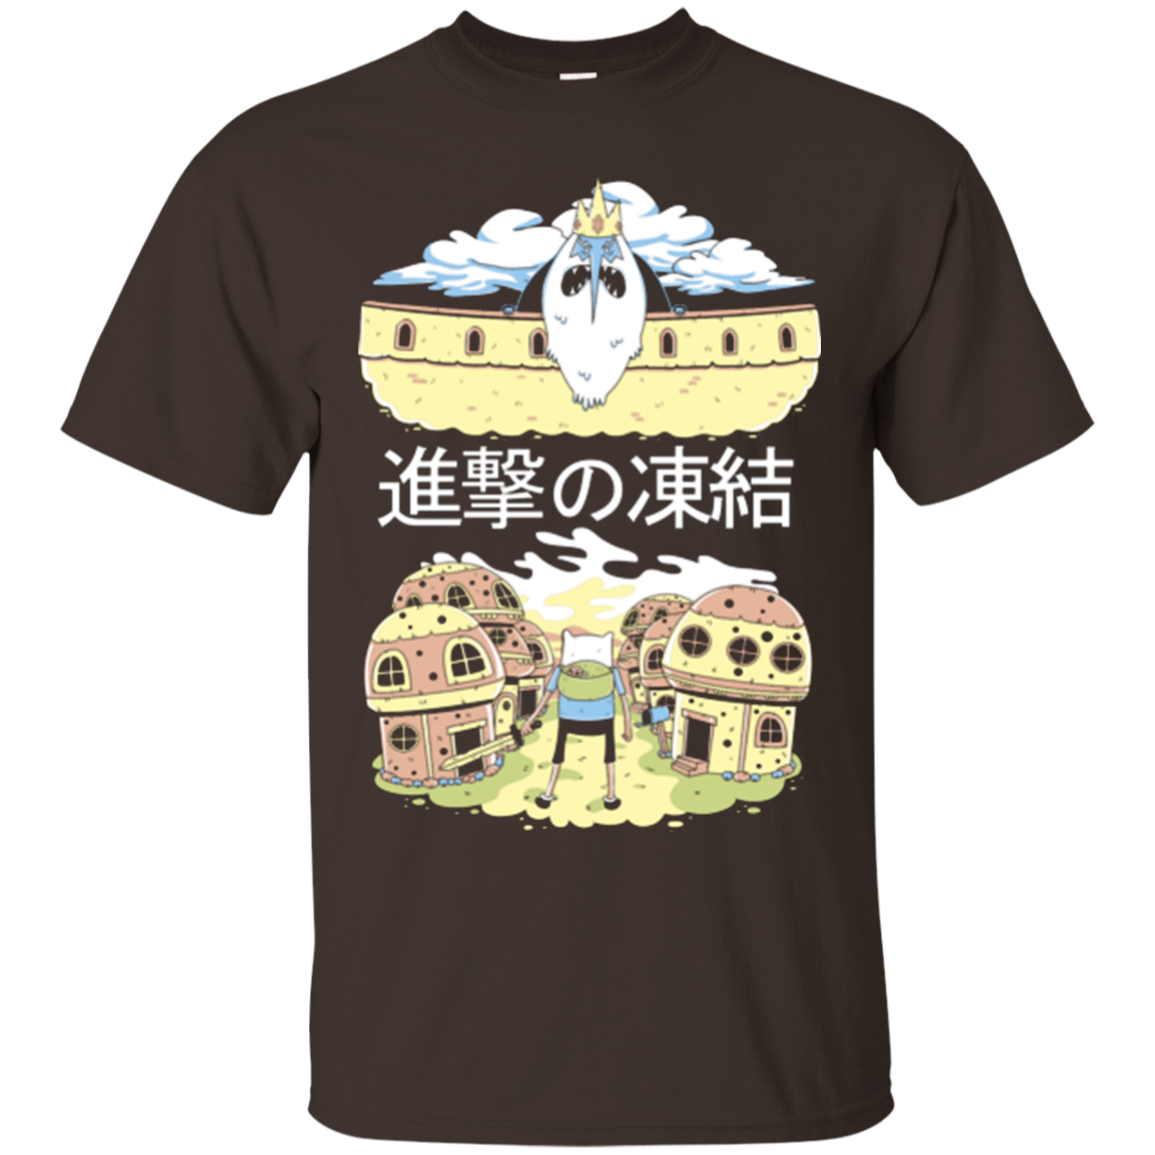 Attack on Freeze T-Shirt